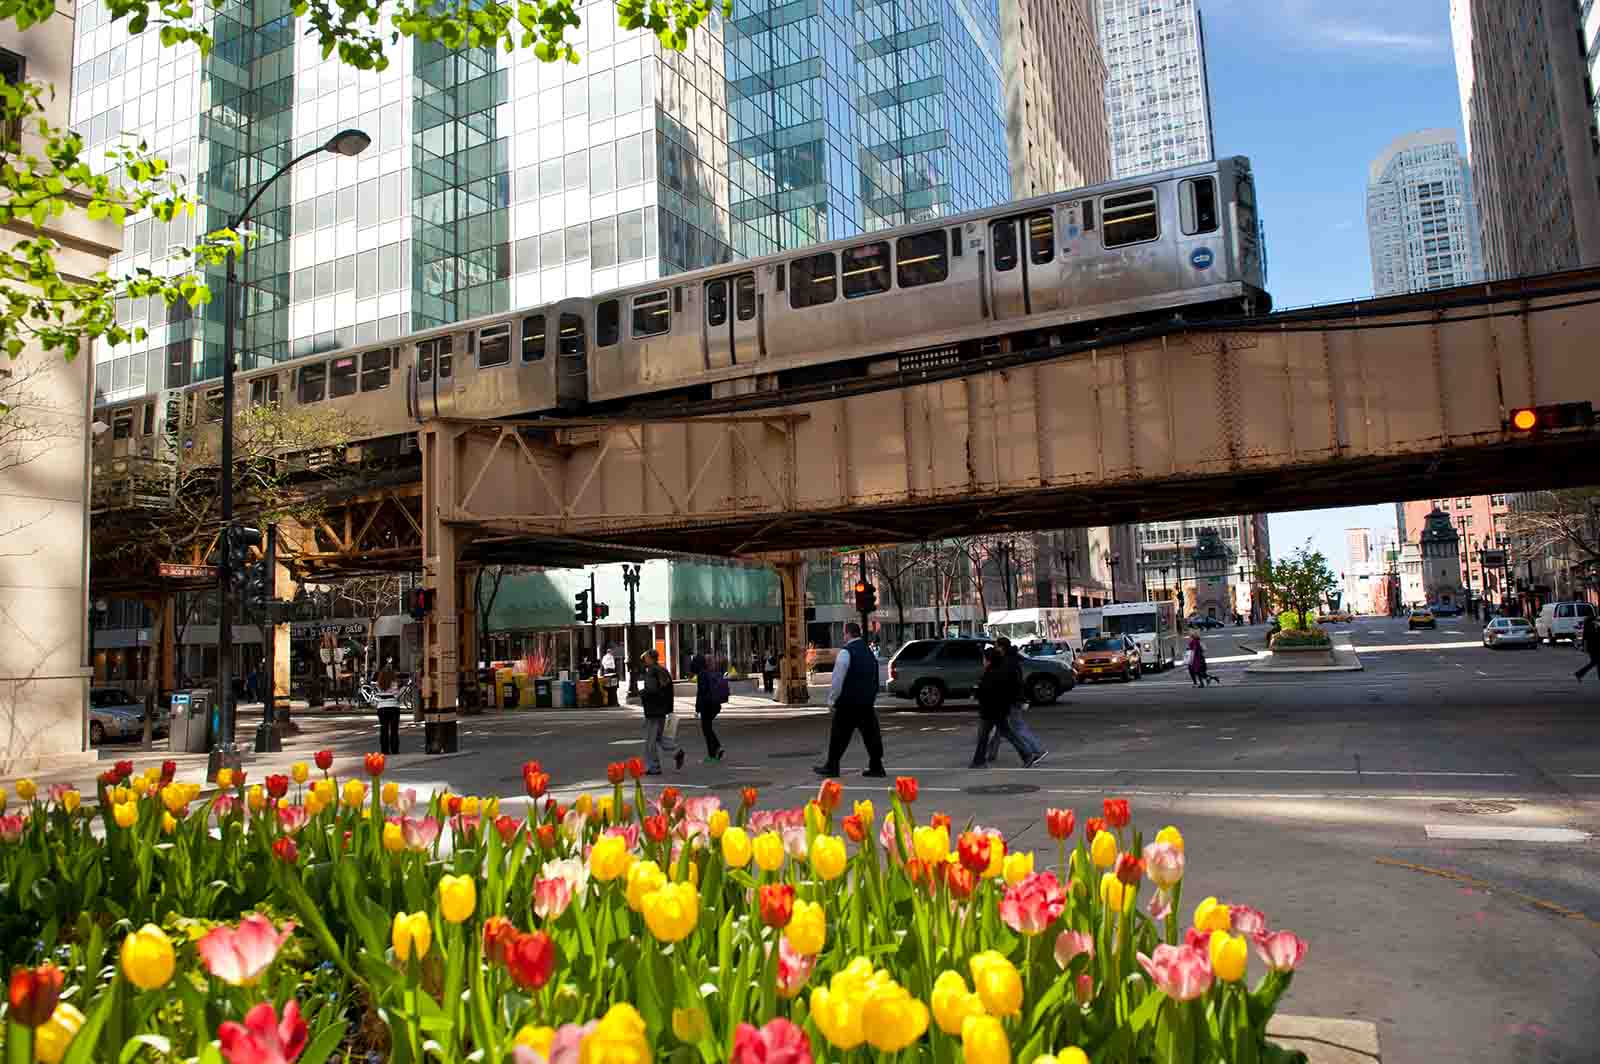 Ride the ‘L’ trains between neighbourhoods in Chicago | See Chicago like a local